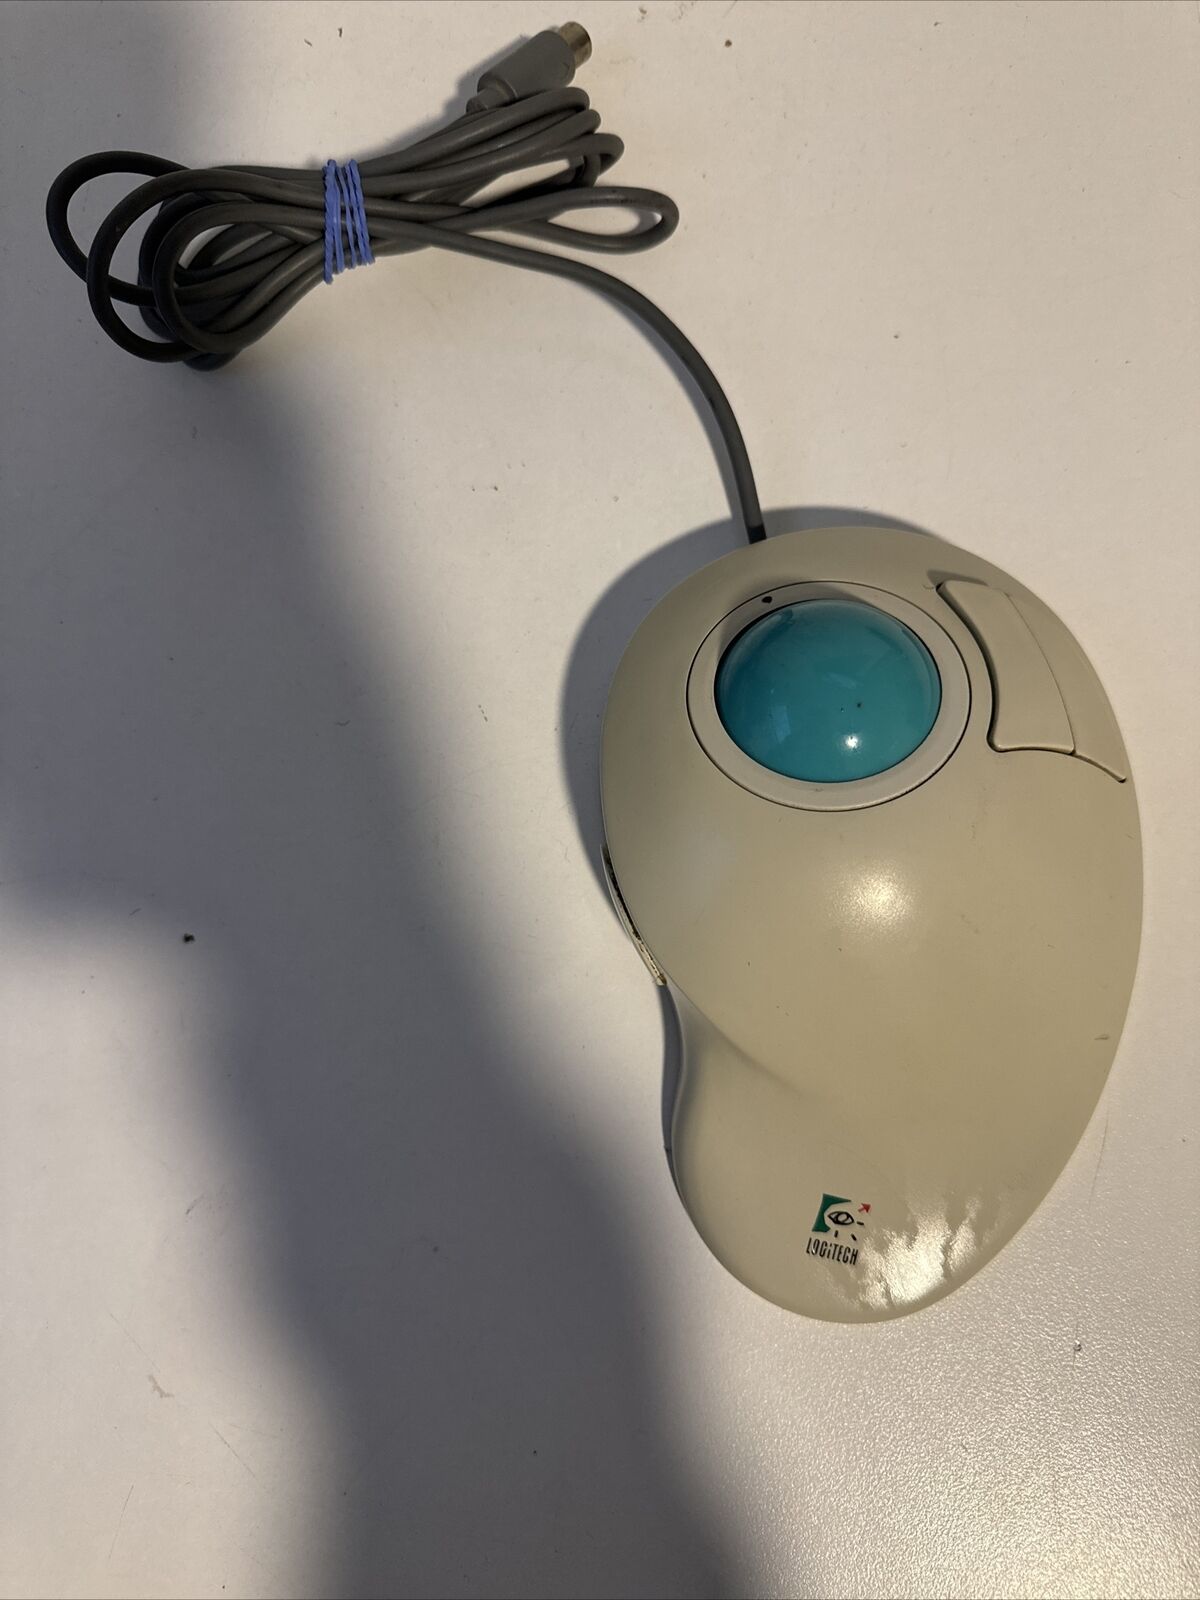 Logitech Trackball Mouse Trackman Vista T-CG10 Vintage PC Gaming TESTED WORKING